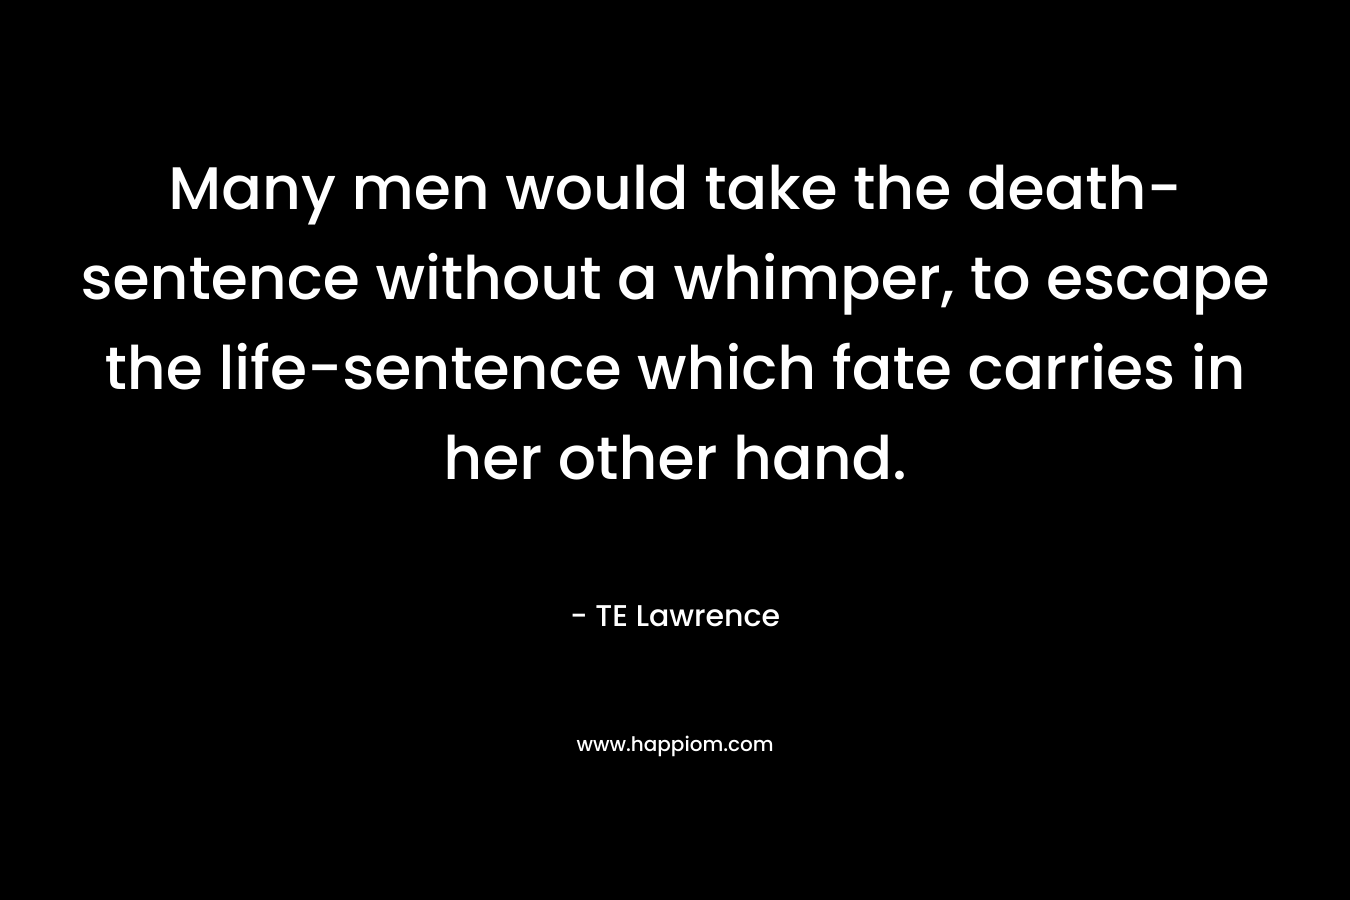 Many men would take the death-sentence without a whimper, to escape the life-sentence which fate carries in her other hand.